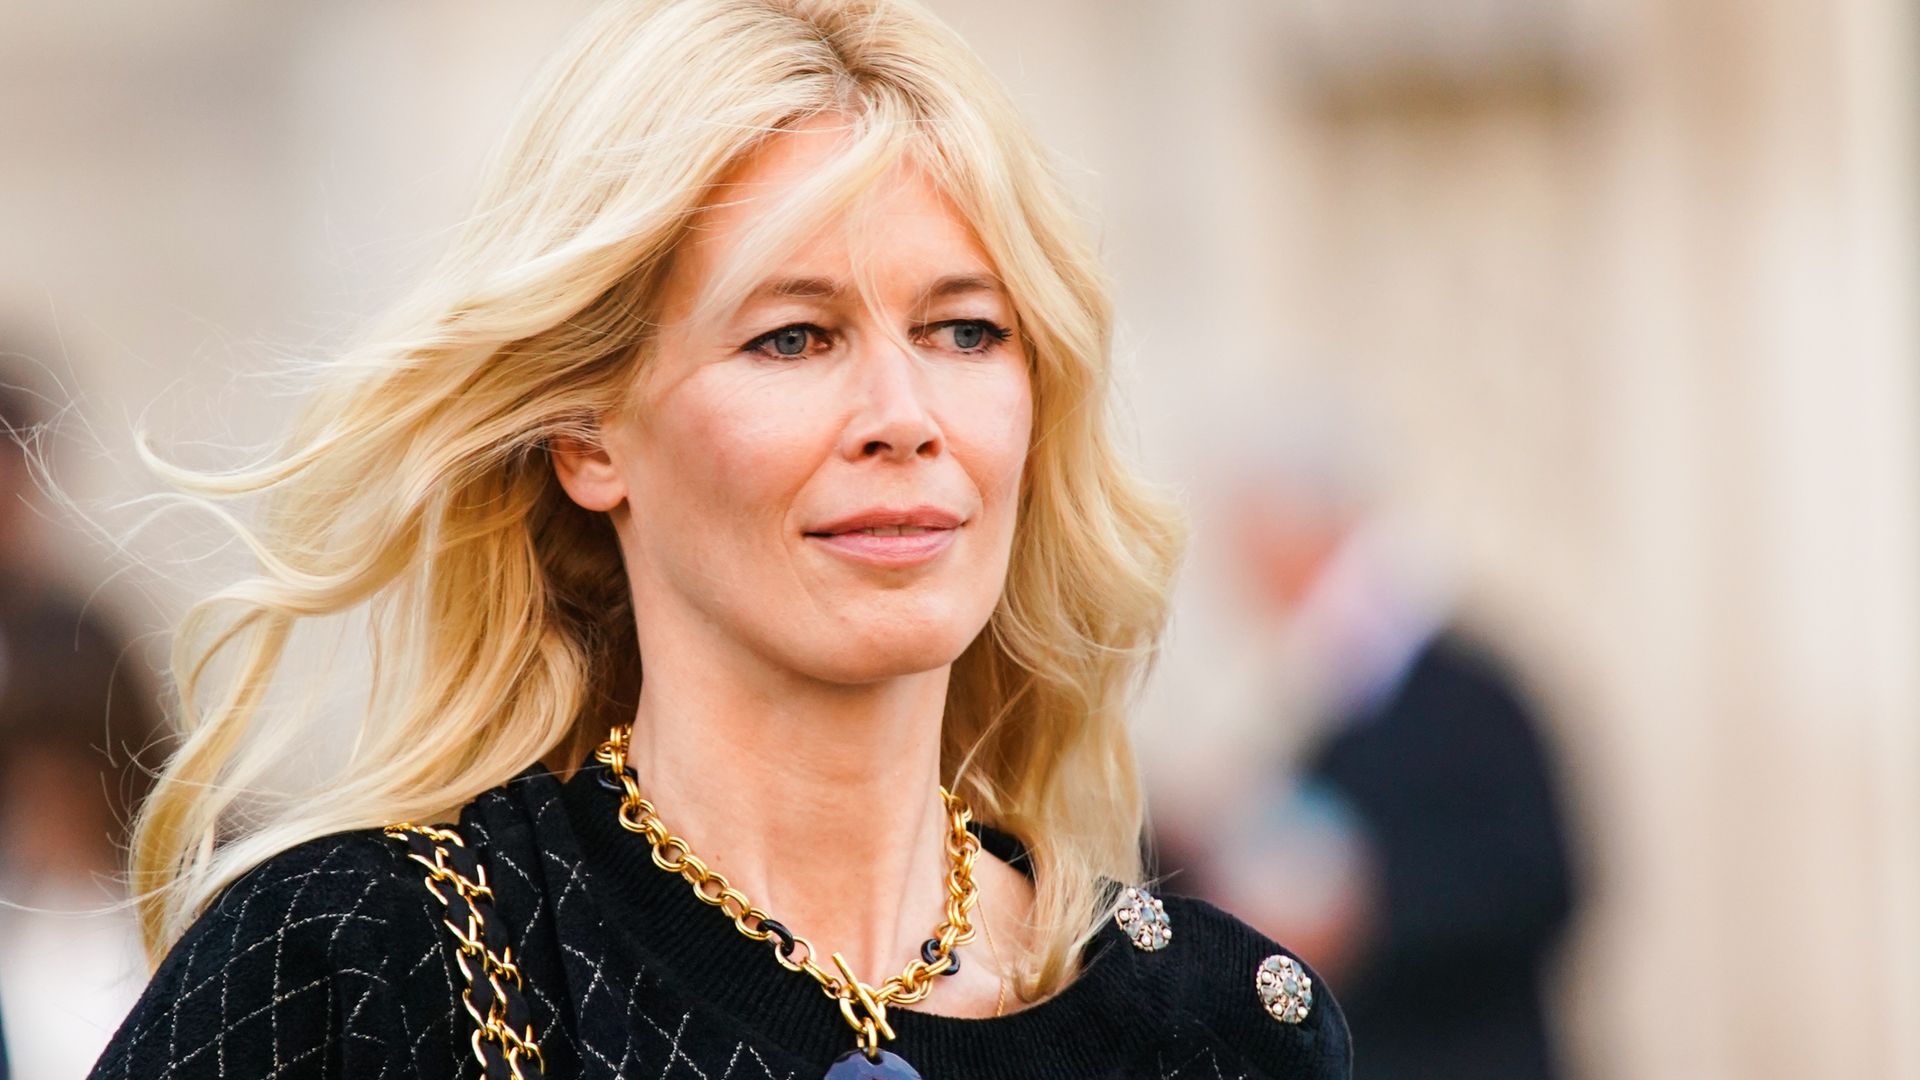 Claudia Schiffer is seen, outside "Karl for Ever" Tribute to Karl Lagerfeld at Grand Palais, during Paris Fashion Week - Menswear Spring/Summer 2020, on June 20, 2019 in Paris, France. (Photo by Edward Berthelot/Getty Images)